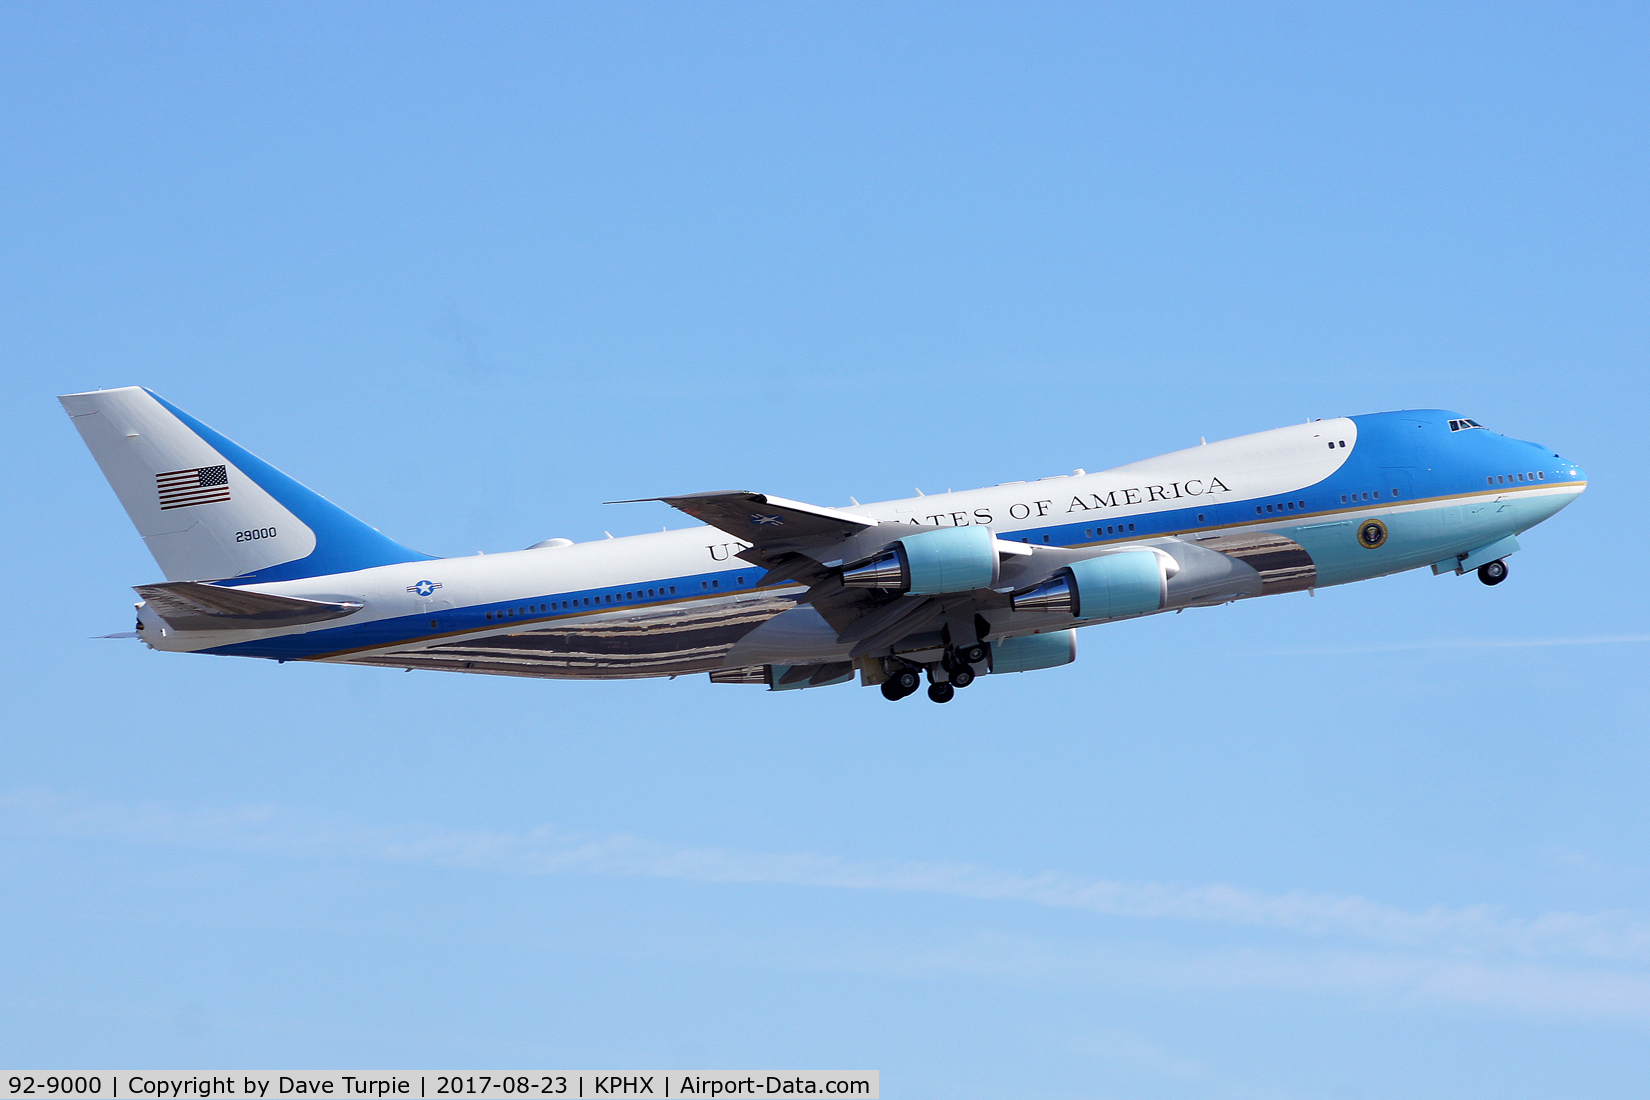 92-9000, 1987 Boeing VC-25A (747-2G4B) C/N 23825, President Trump was onboard. Look at the reflection of the runway on the bottom of the fuselage. Check out my photo of 82-8000.